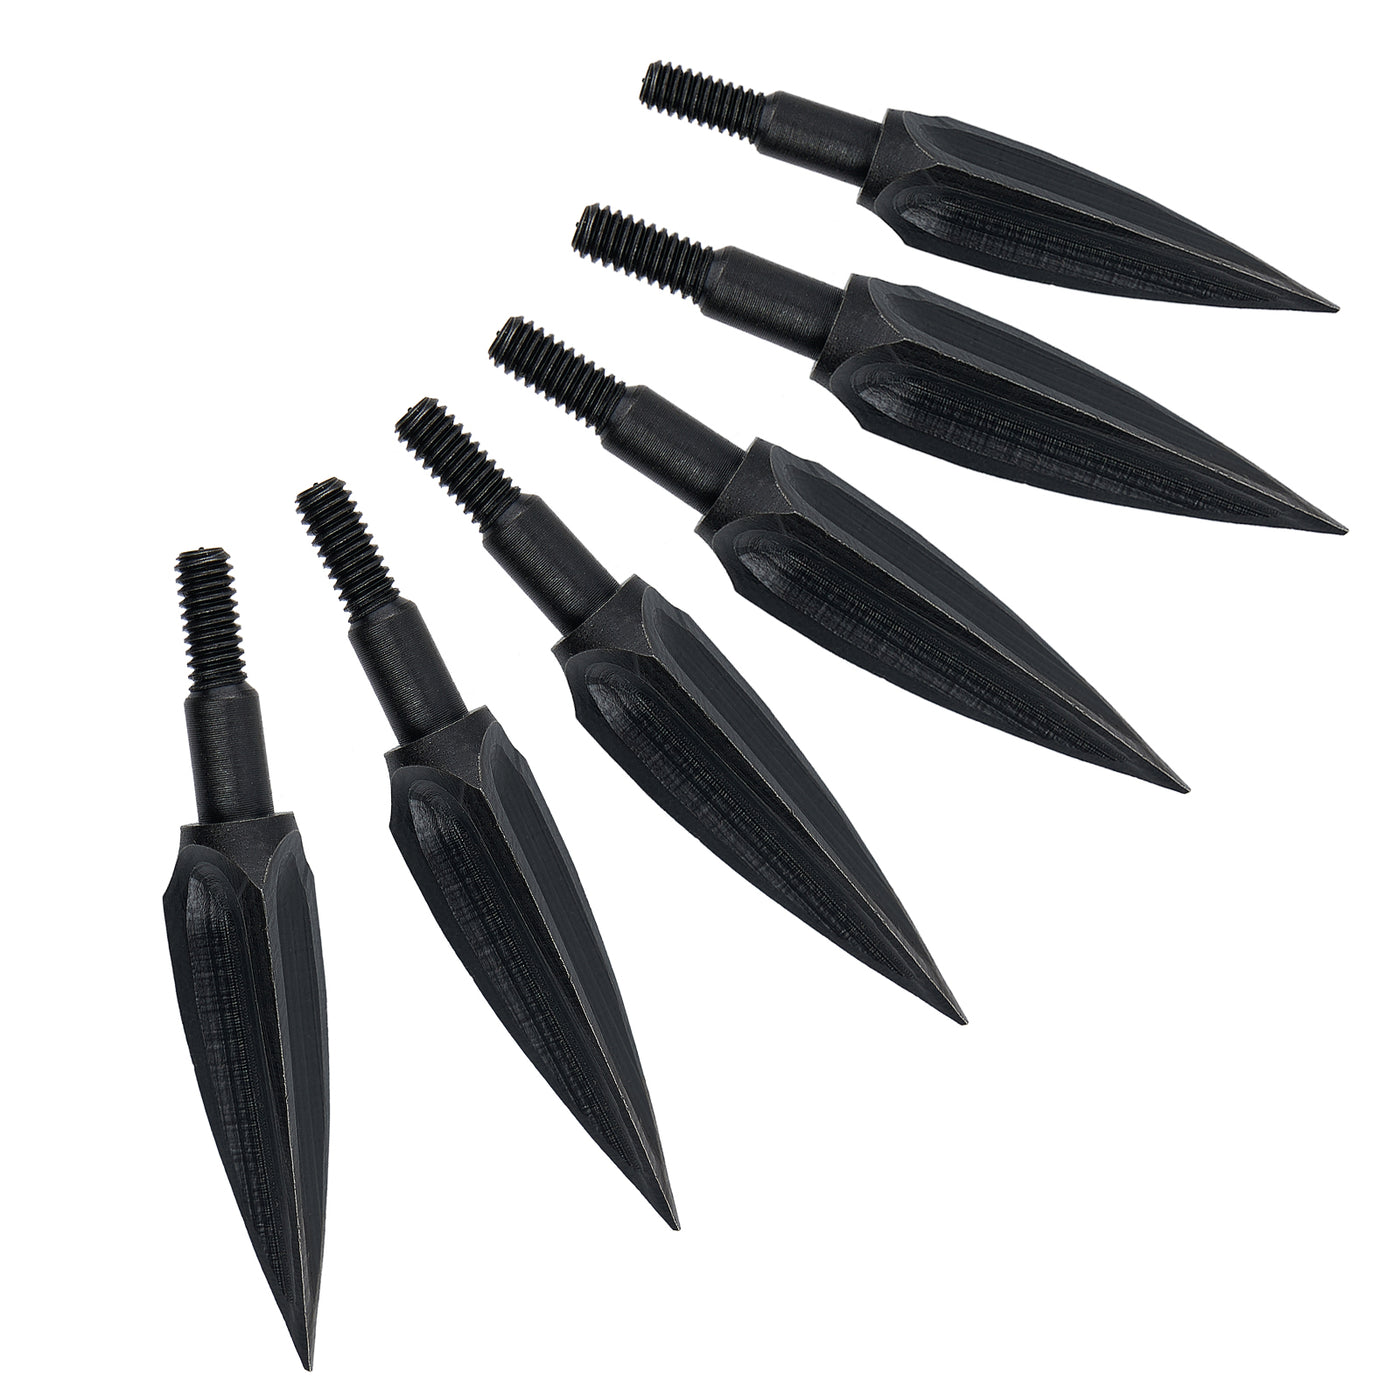 12x 3-blade 125 Grain Carbon Steel Willow Leaf Archery Arrowheads Tips Black For Hunting